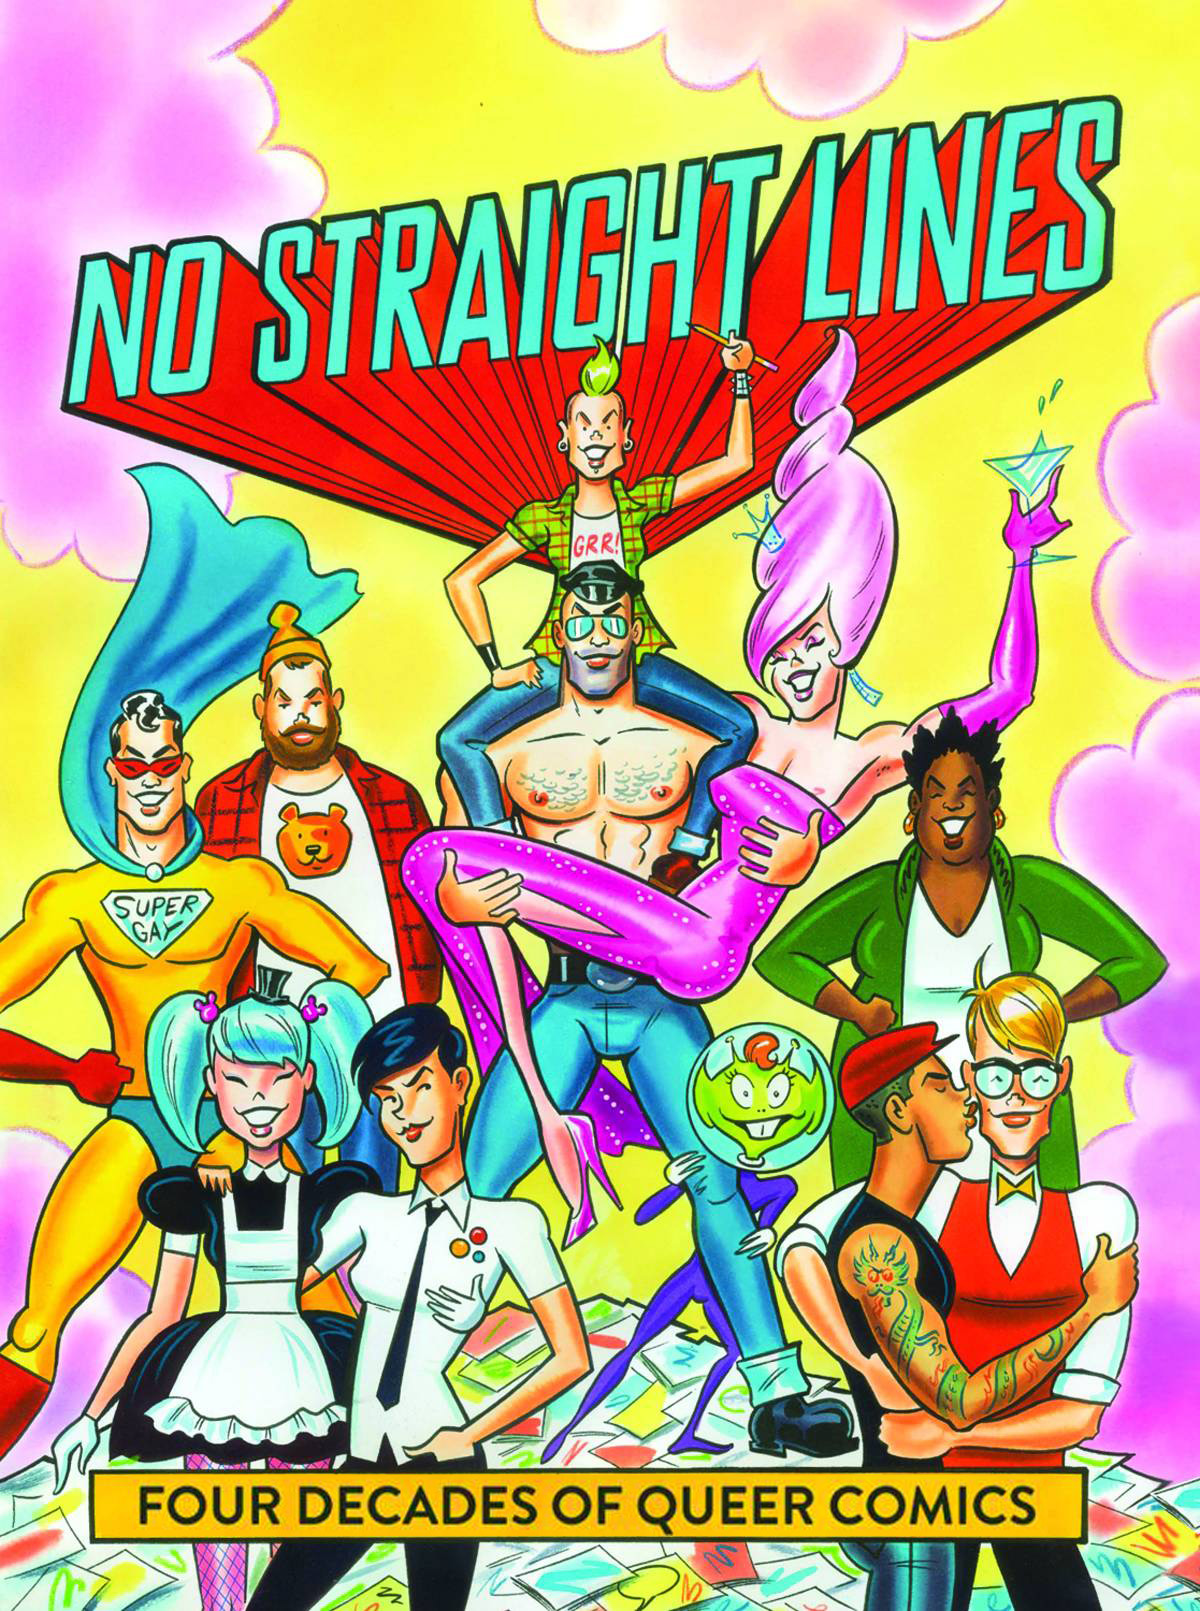 NO STRAIGHT LINES poster